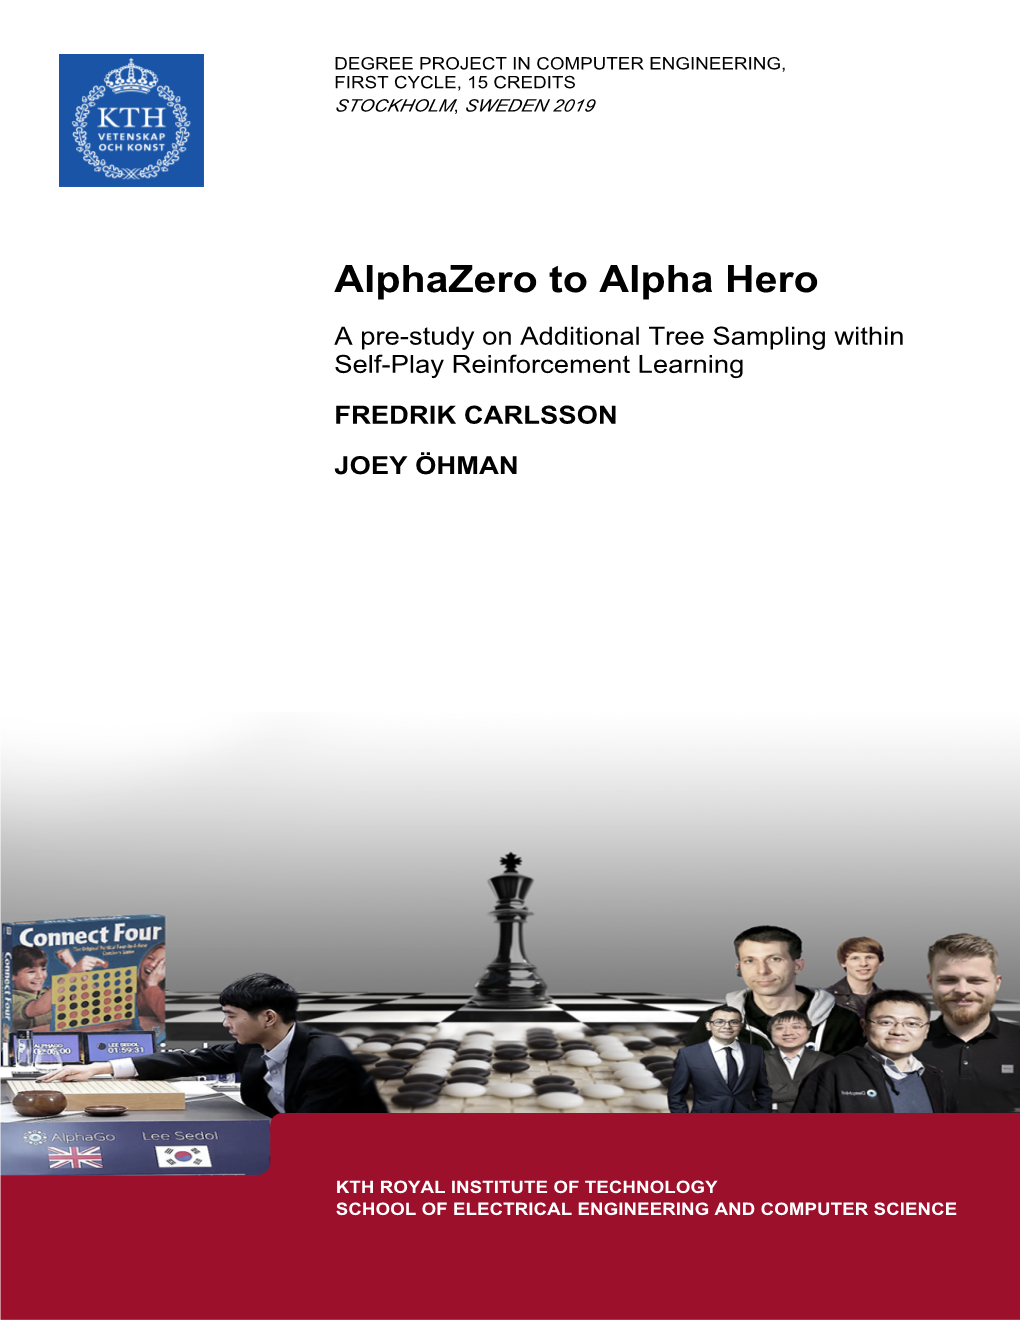 Alphazero to Alpha Hero a Pre-Study on Additional Tree Sampling Within Self-Play Reinforcement Learning